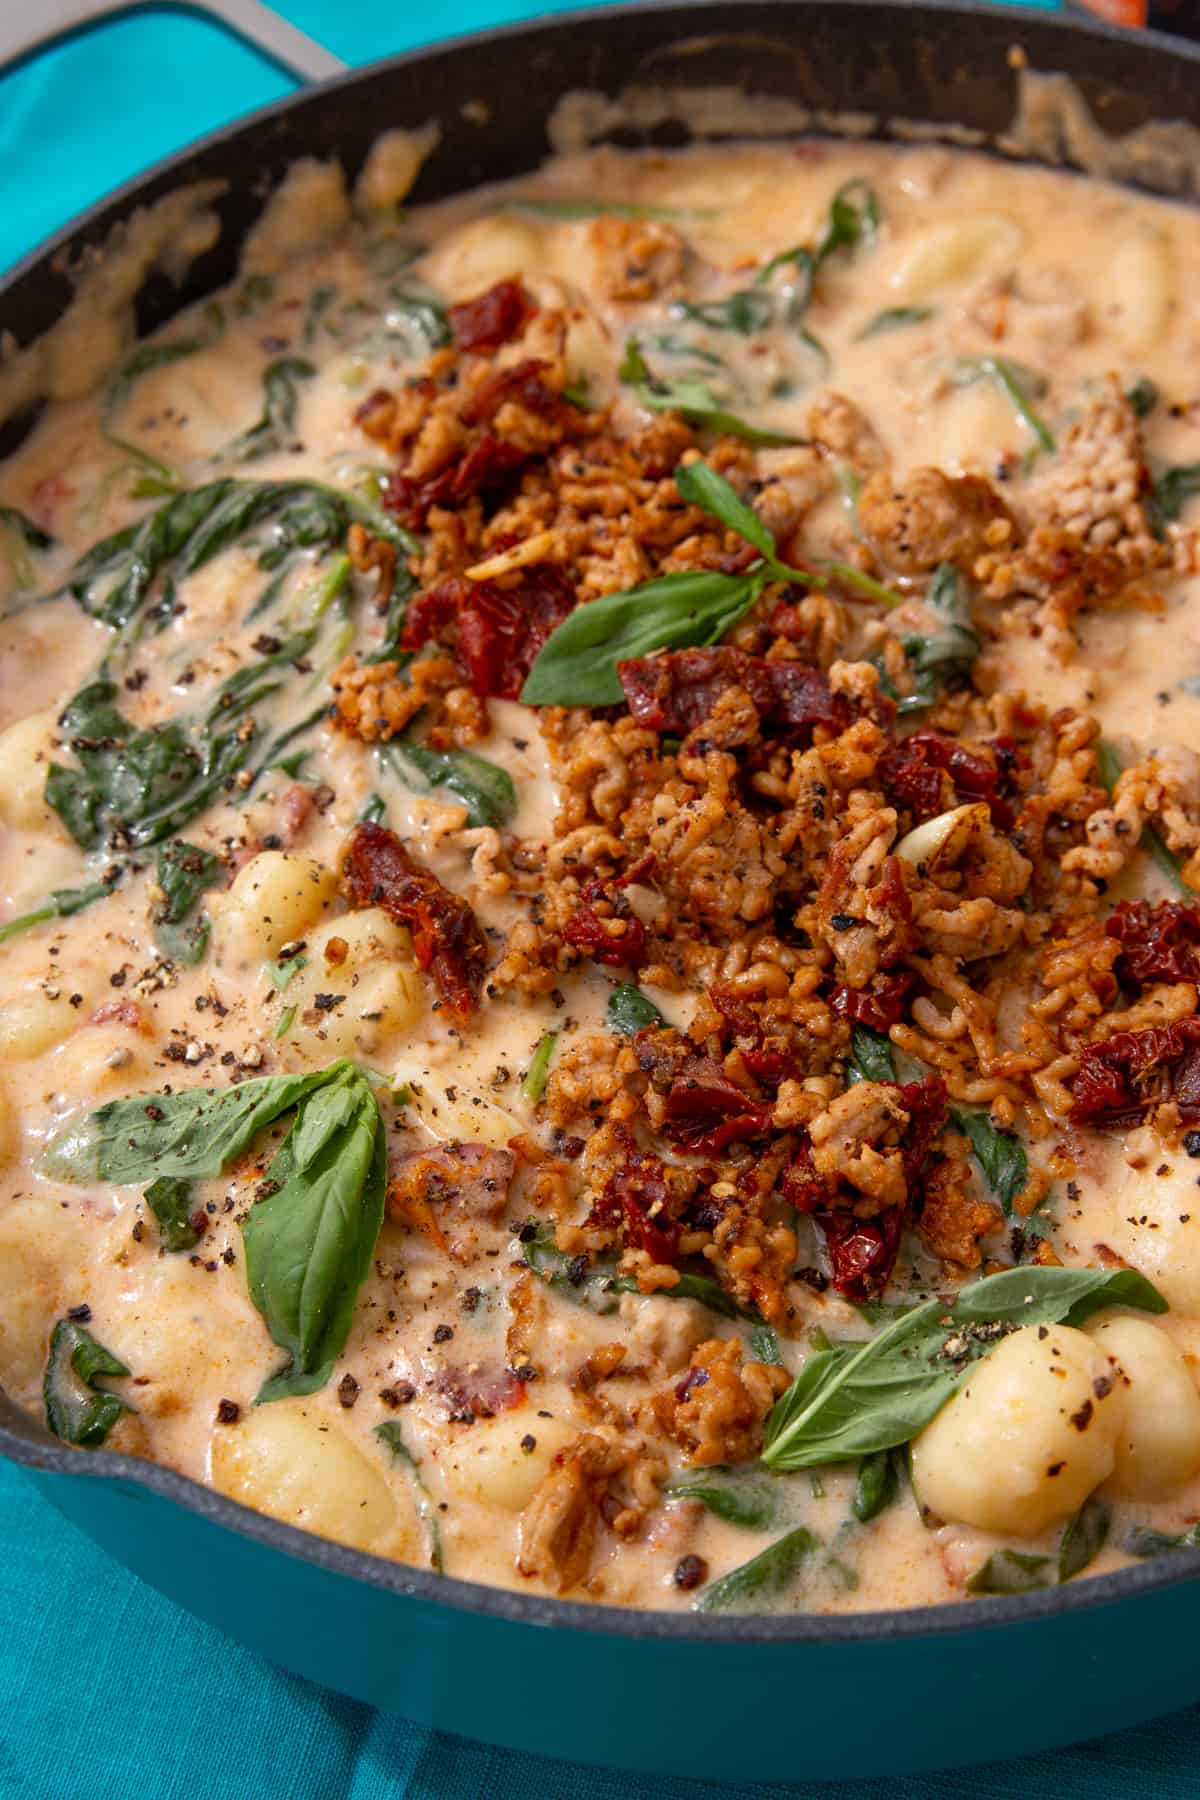 Gnocchi with a creamy sauce with pork mince, spinach and sun-dried tomatoes topped with extra browned pork and sun-dried tomatoes and fresh basil.